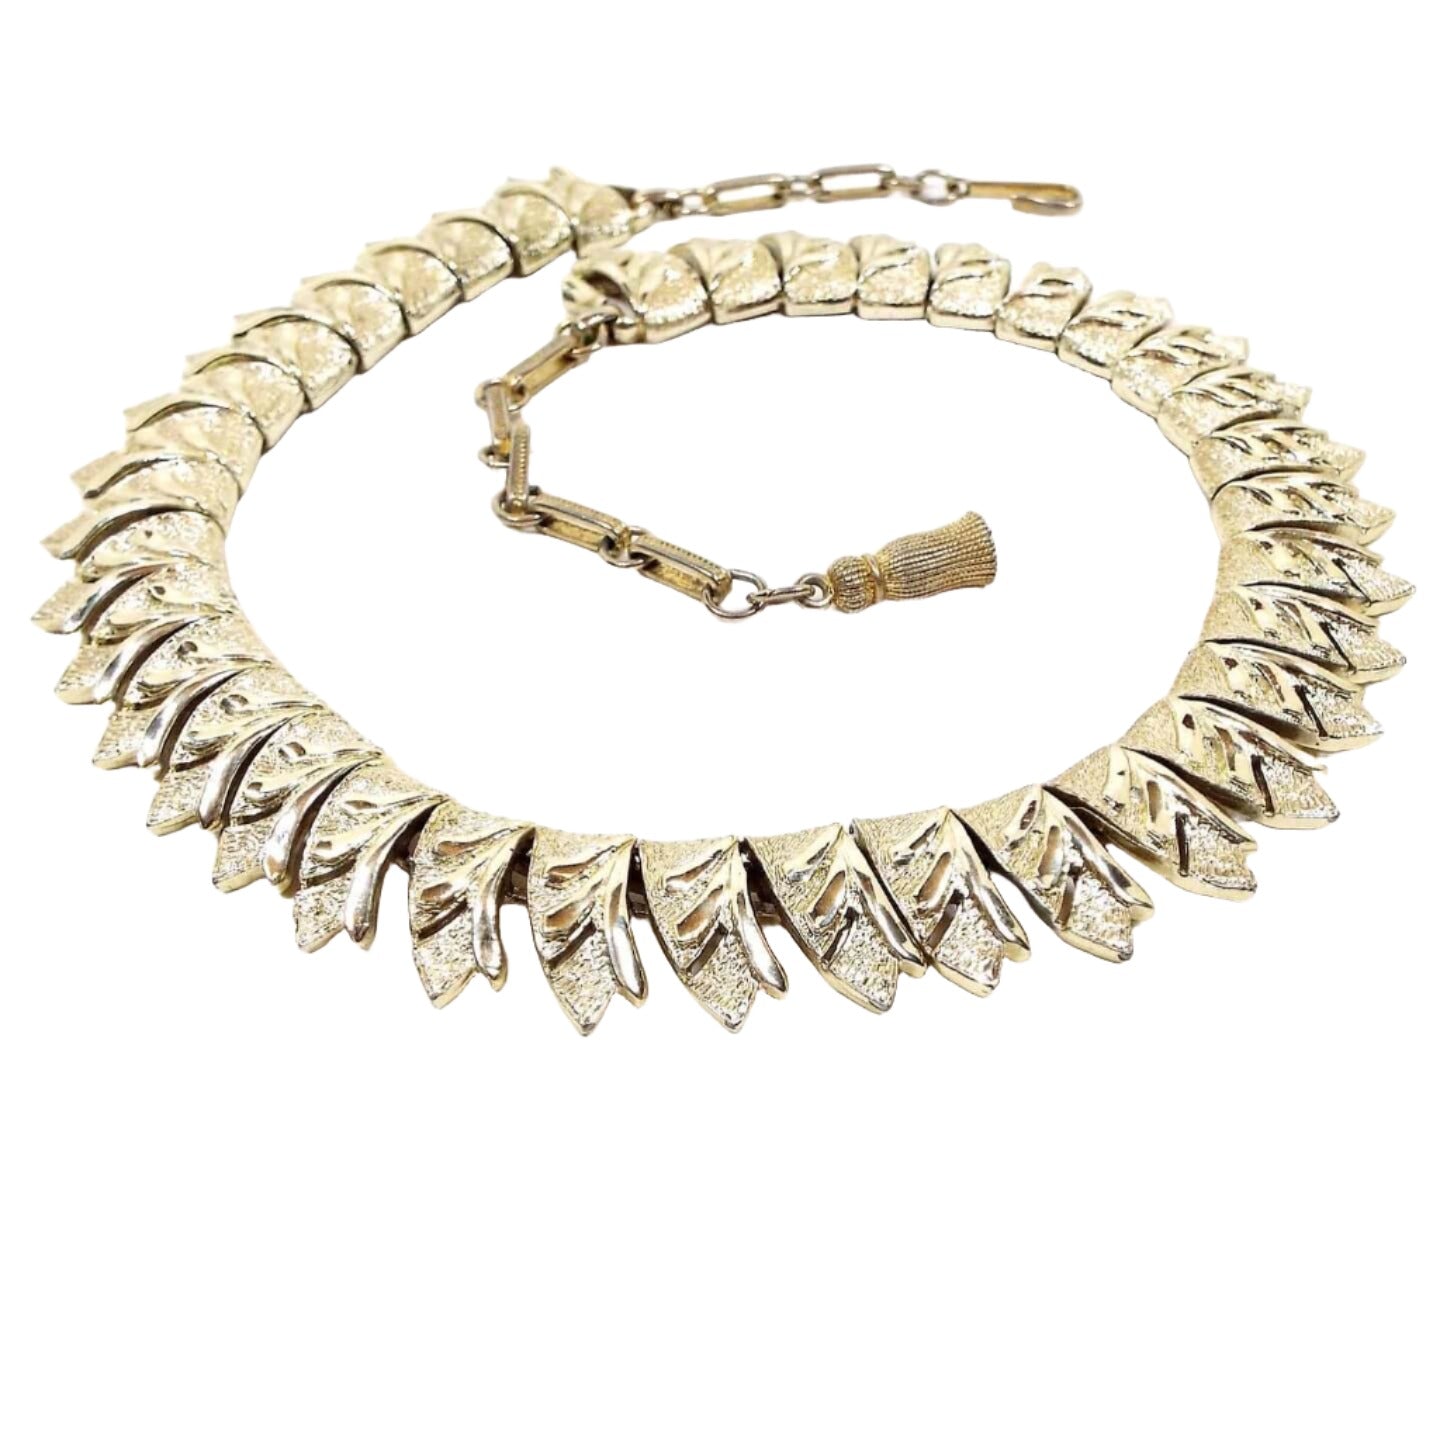 Front view of the Mid Century vintage Coro link choker necklace. It is gold tone in color. The links are shaped like ribbon ends and have an etched leaf type pattern cut on them. There is a hook clasp at the end.